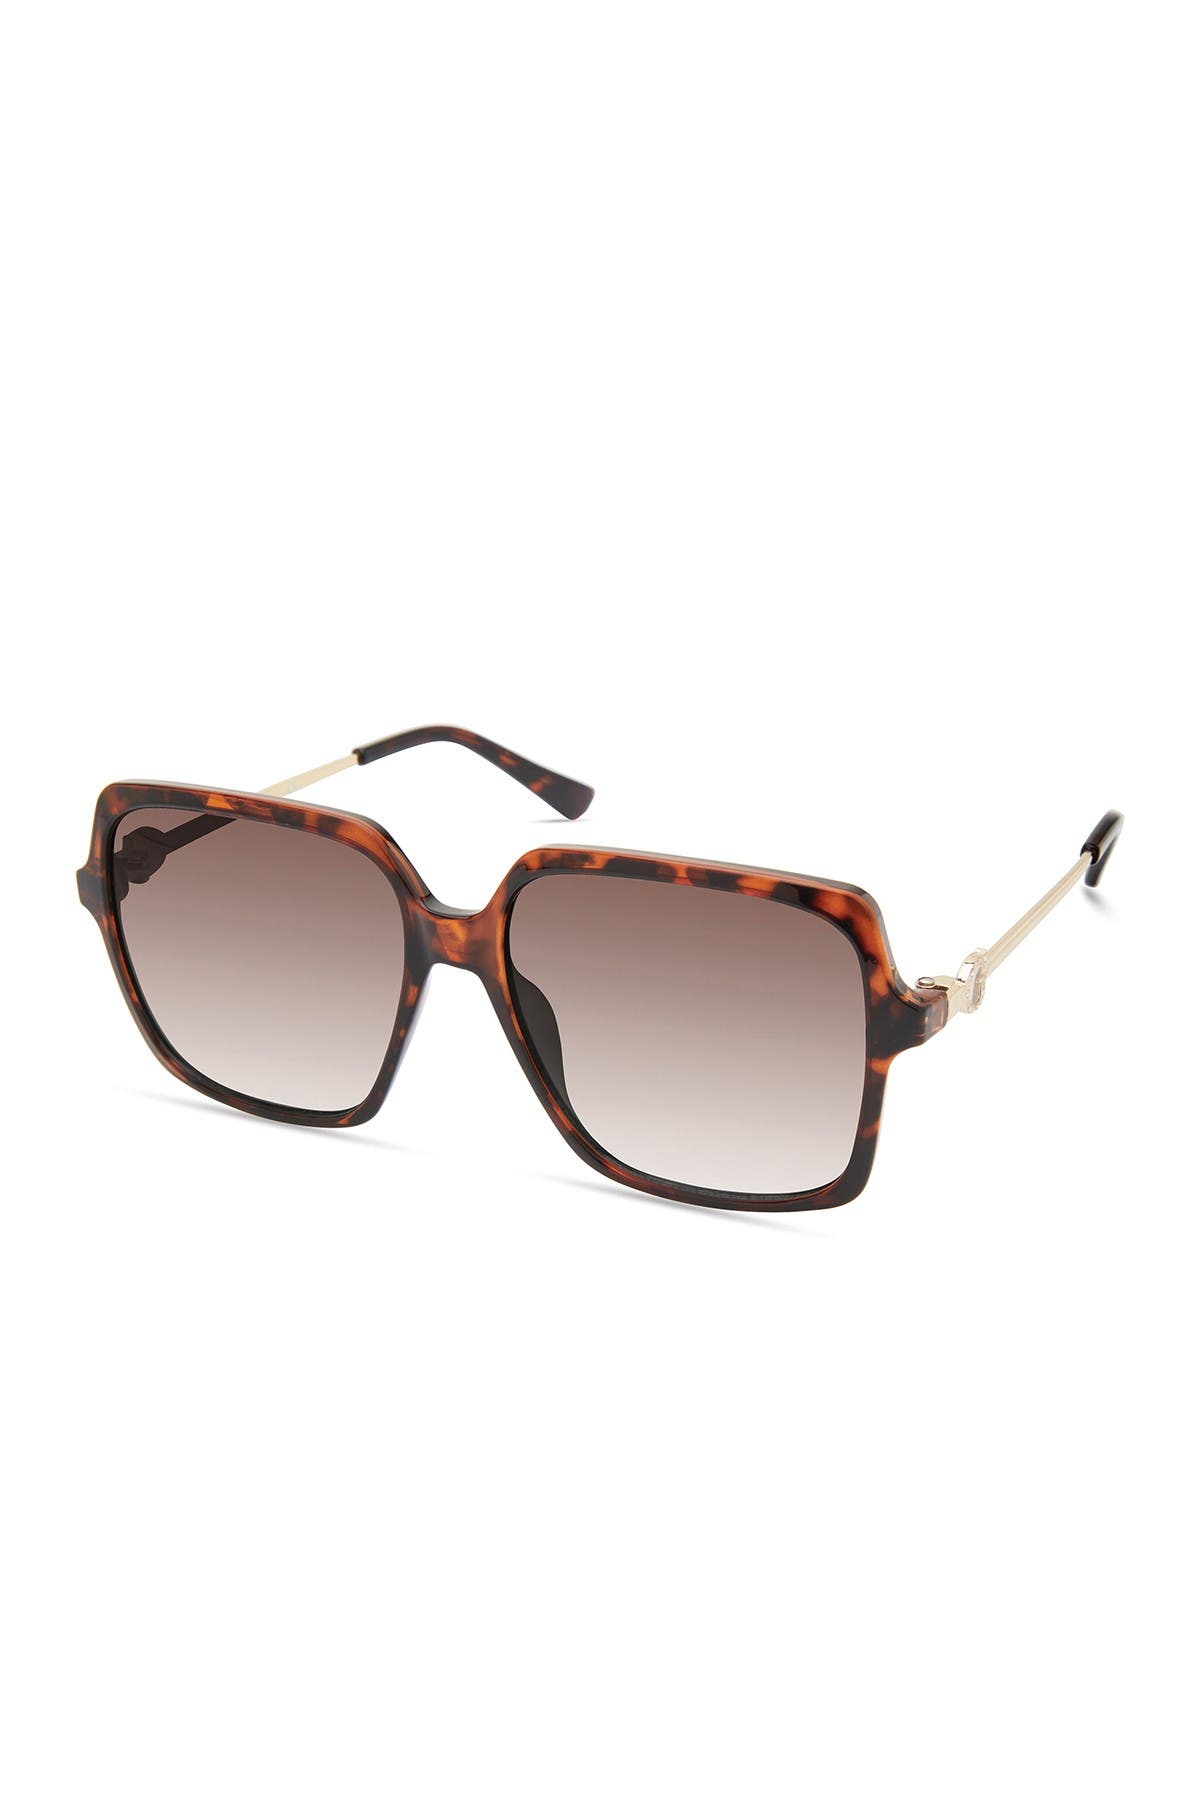 Guess 56mm Square Sunglasses In Dhav/brng